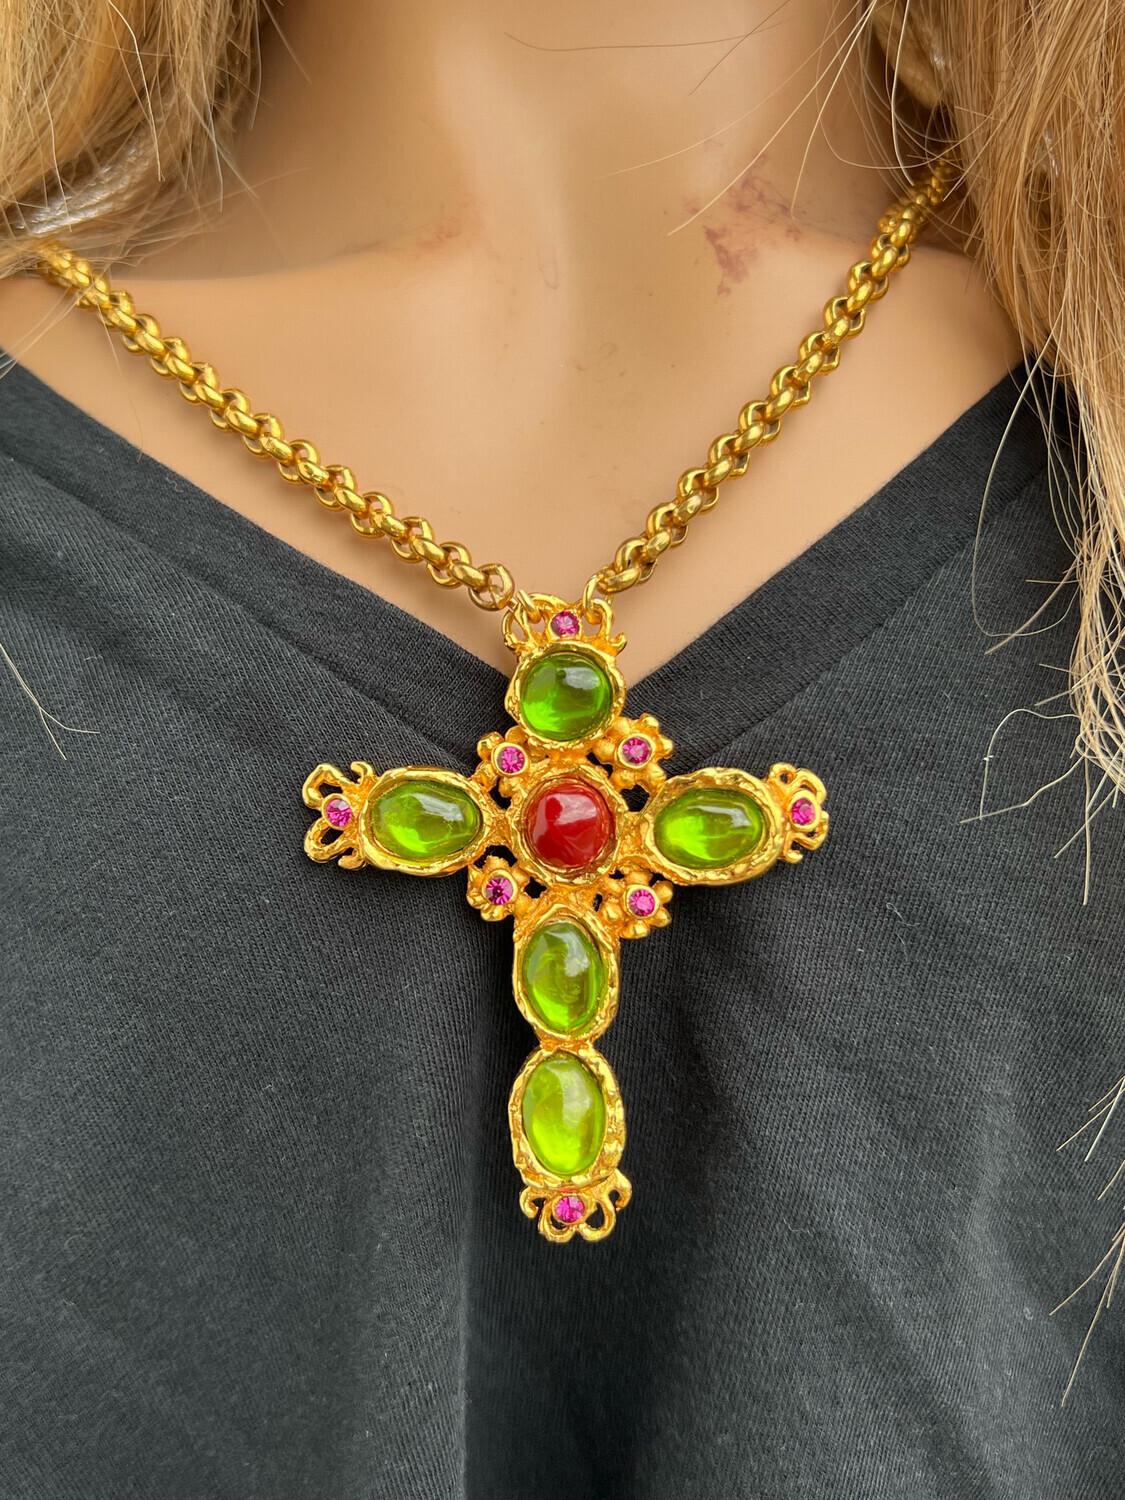 Haute couture model in perfect condition, unused it is absolutely sublime.

 offert standard shipping and 50 % discount on express shipping 

How is it made ? 
Christian Lacroix vintage pendant gold toned and gripoix 
Marked Christian Lacroix CL